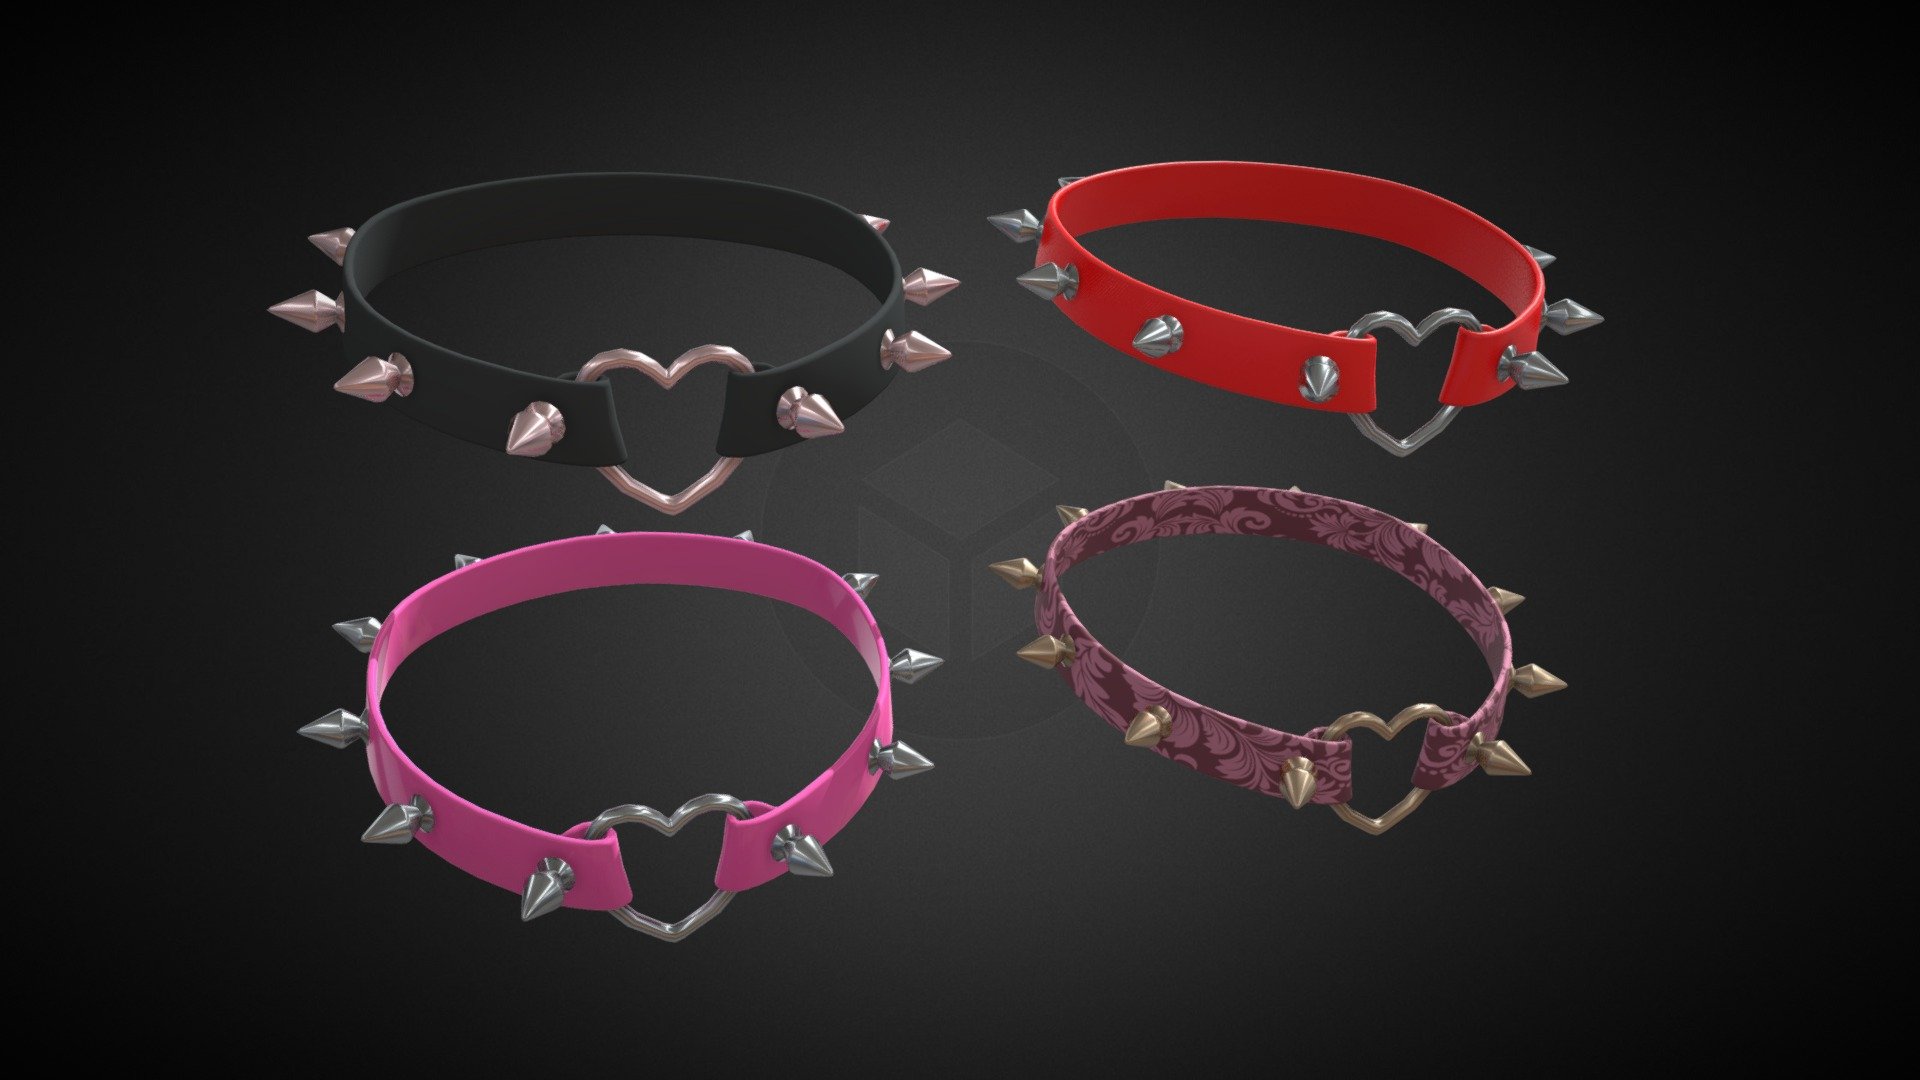 “Courtney” comes in 4 finishes:




Black Leather / Rose Gold

Red Leather with white Dots / Chrome 

Pink Latex / Chrome

Purple Leather / Nickel Silver

Materials have very simple Principled BDSF shaders, and the leather textures are free assets. 
The leather straps have a Subdivision modifer, so it will look smoother than the preview you are seeing.

All the chokers are controlled and deformed by lattices 3d model